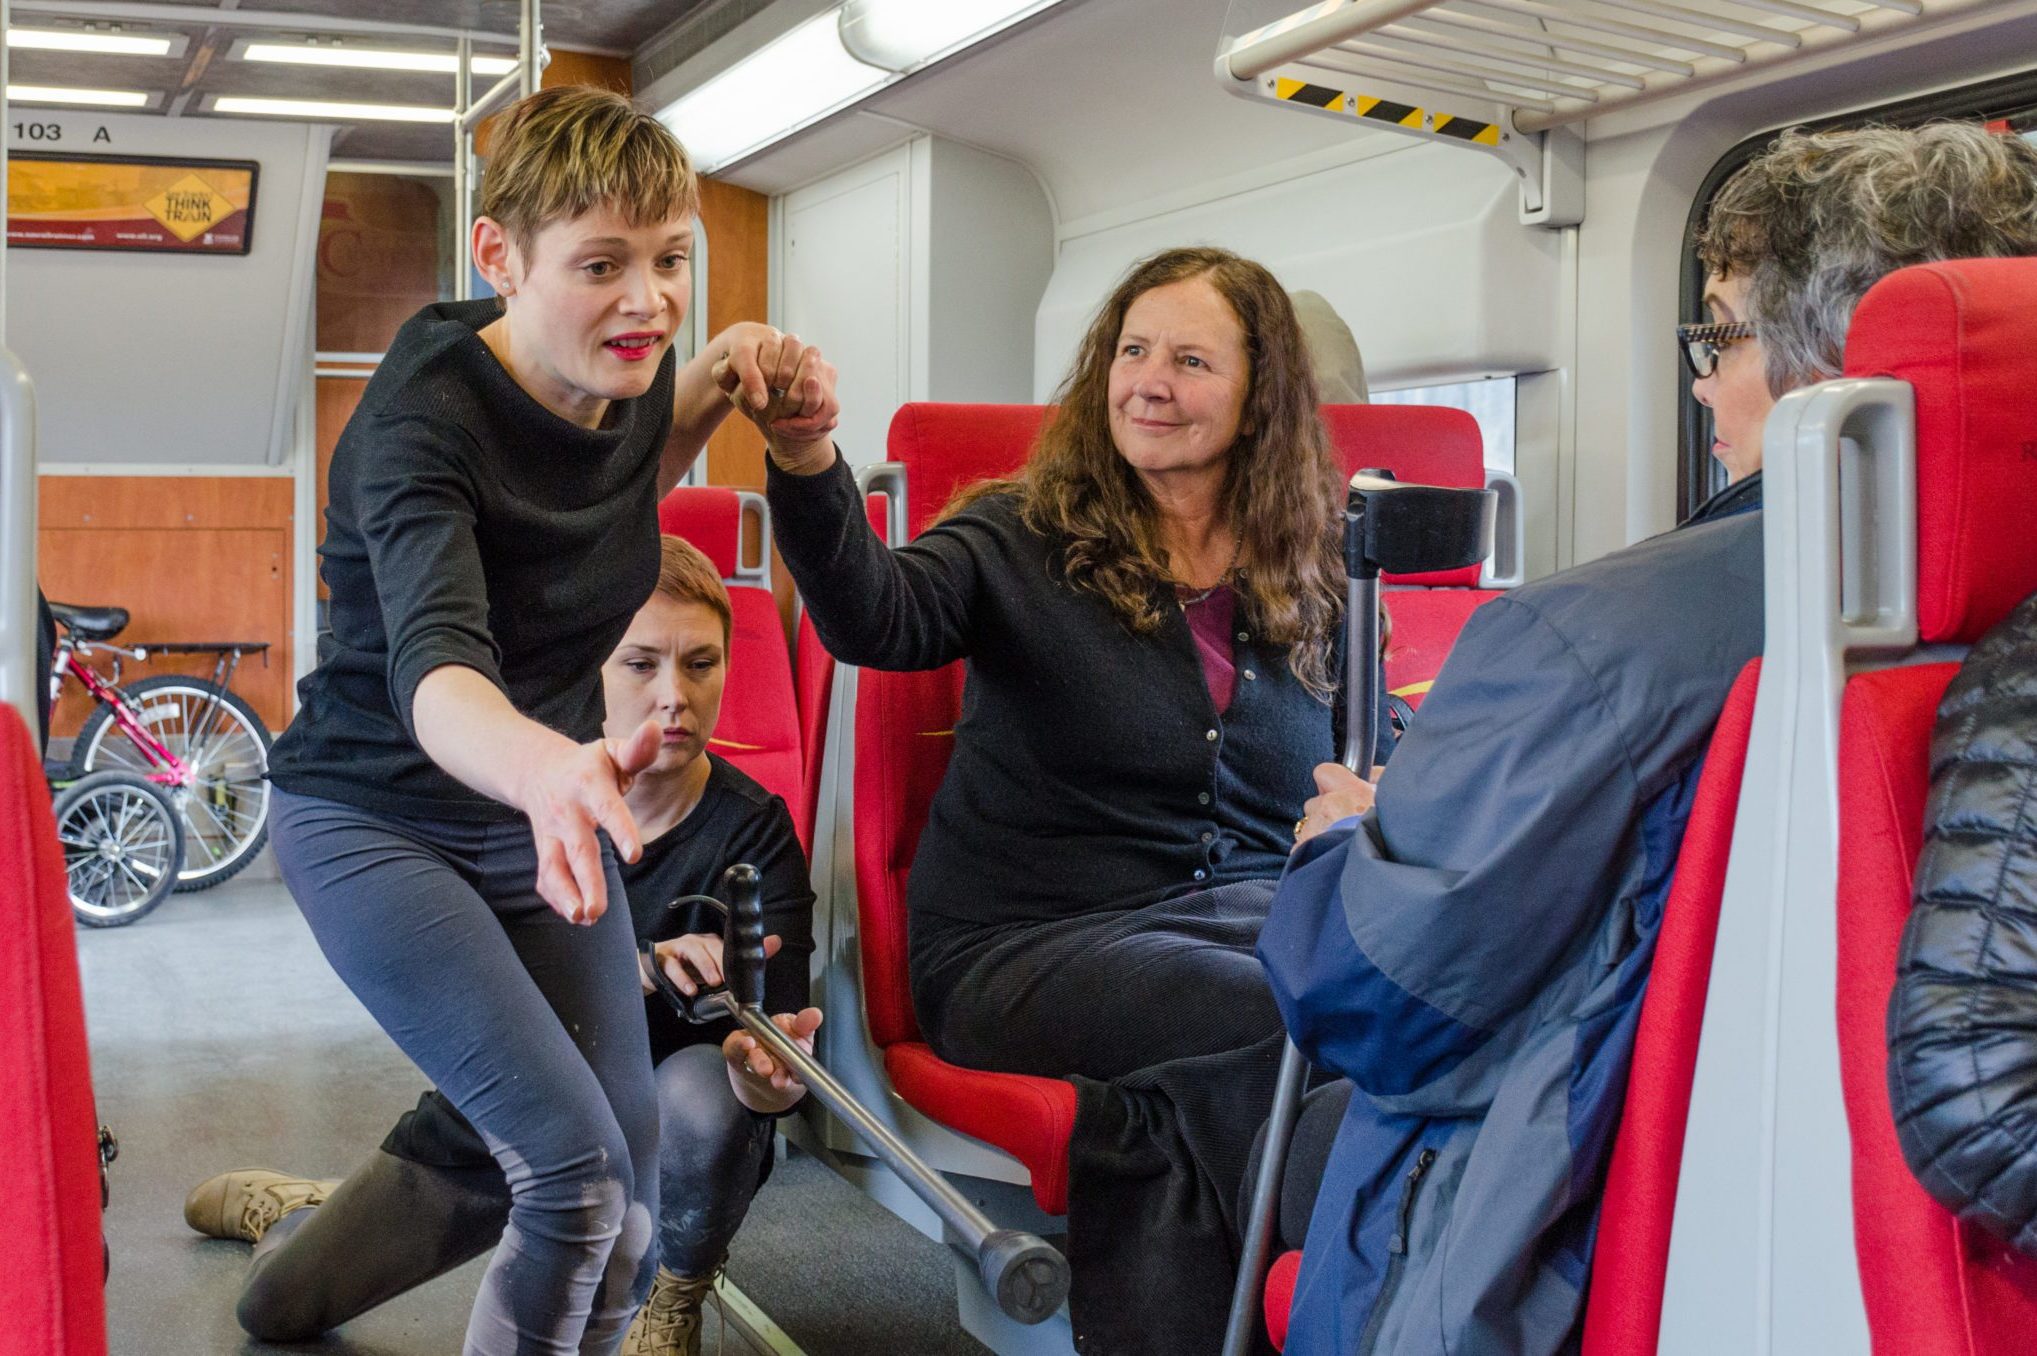 Tanya Winters and Silva Laukkanen dancing on a train. Tanya holds hands with a passenger as Silva passing Tanya's crutches to another passenger.